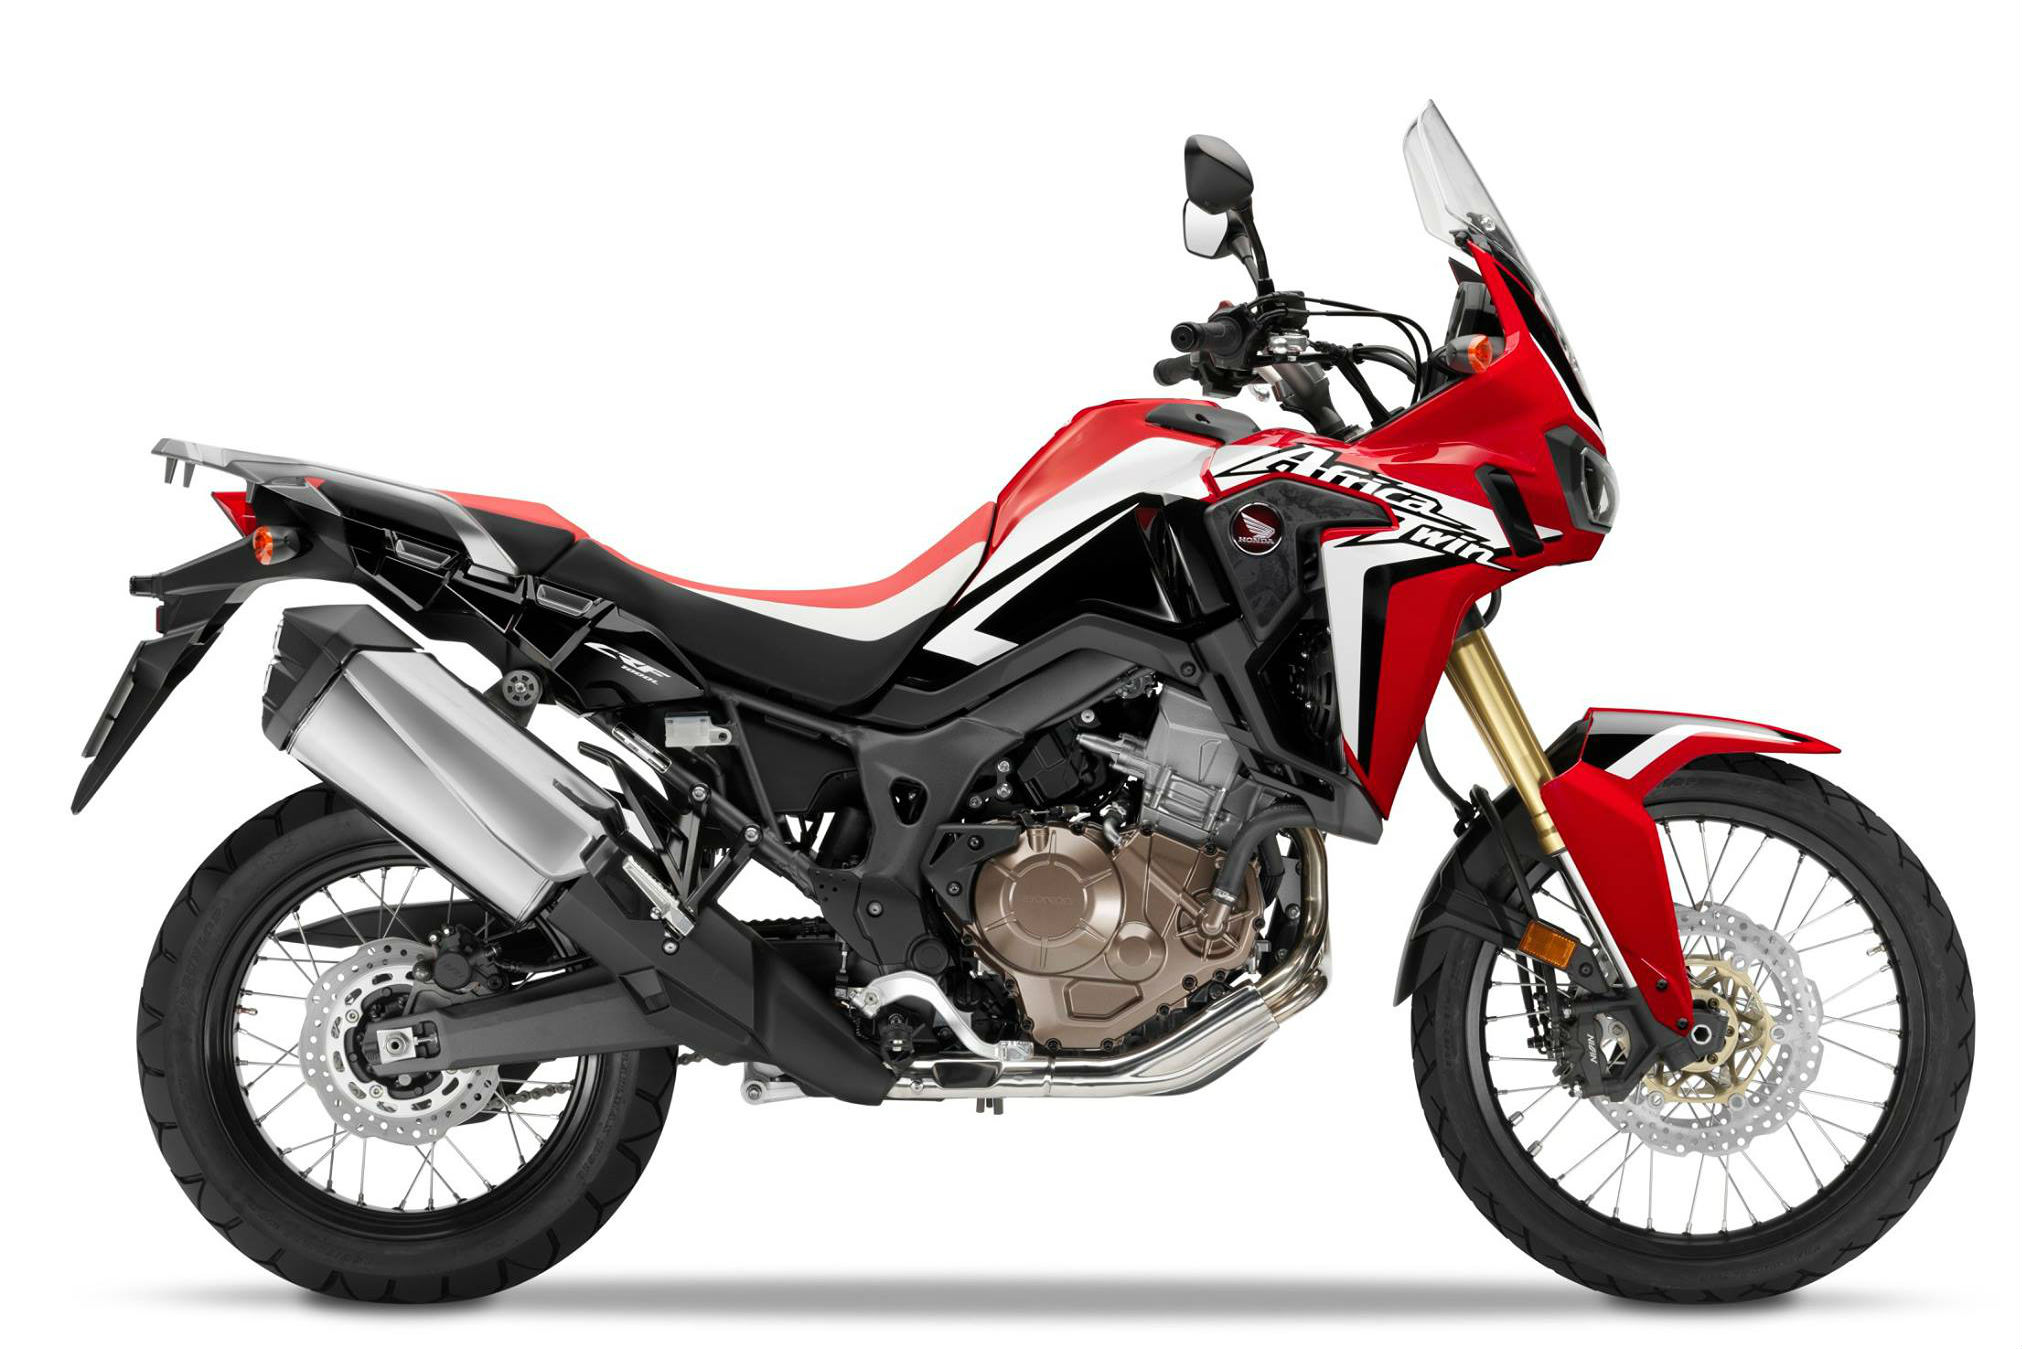 Honda Africa Twin full specs and hi-res picture leaked